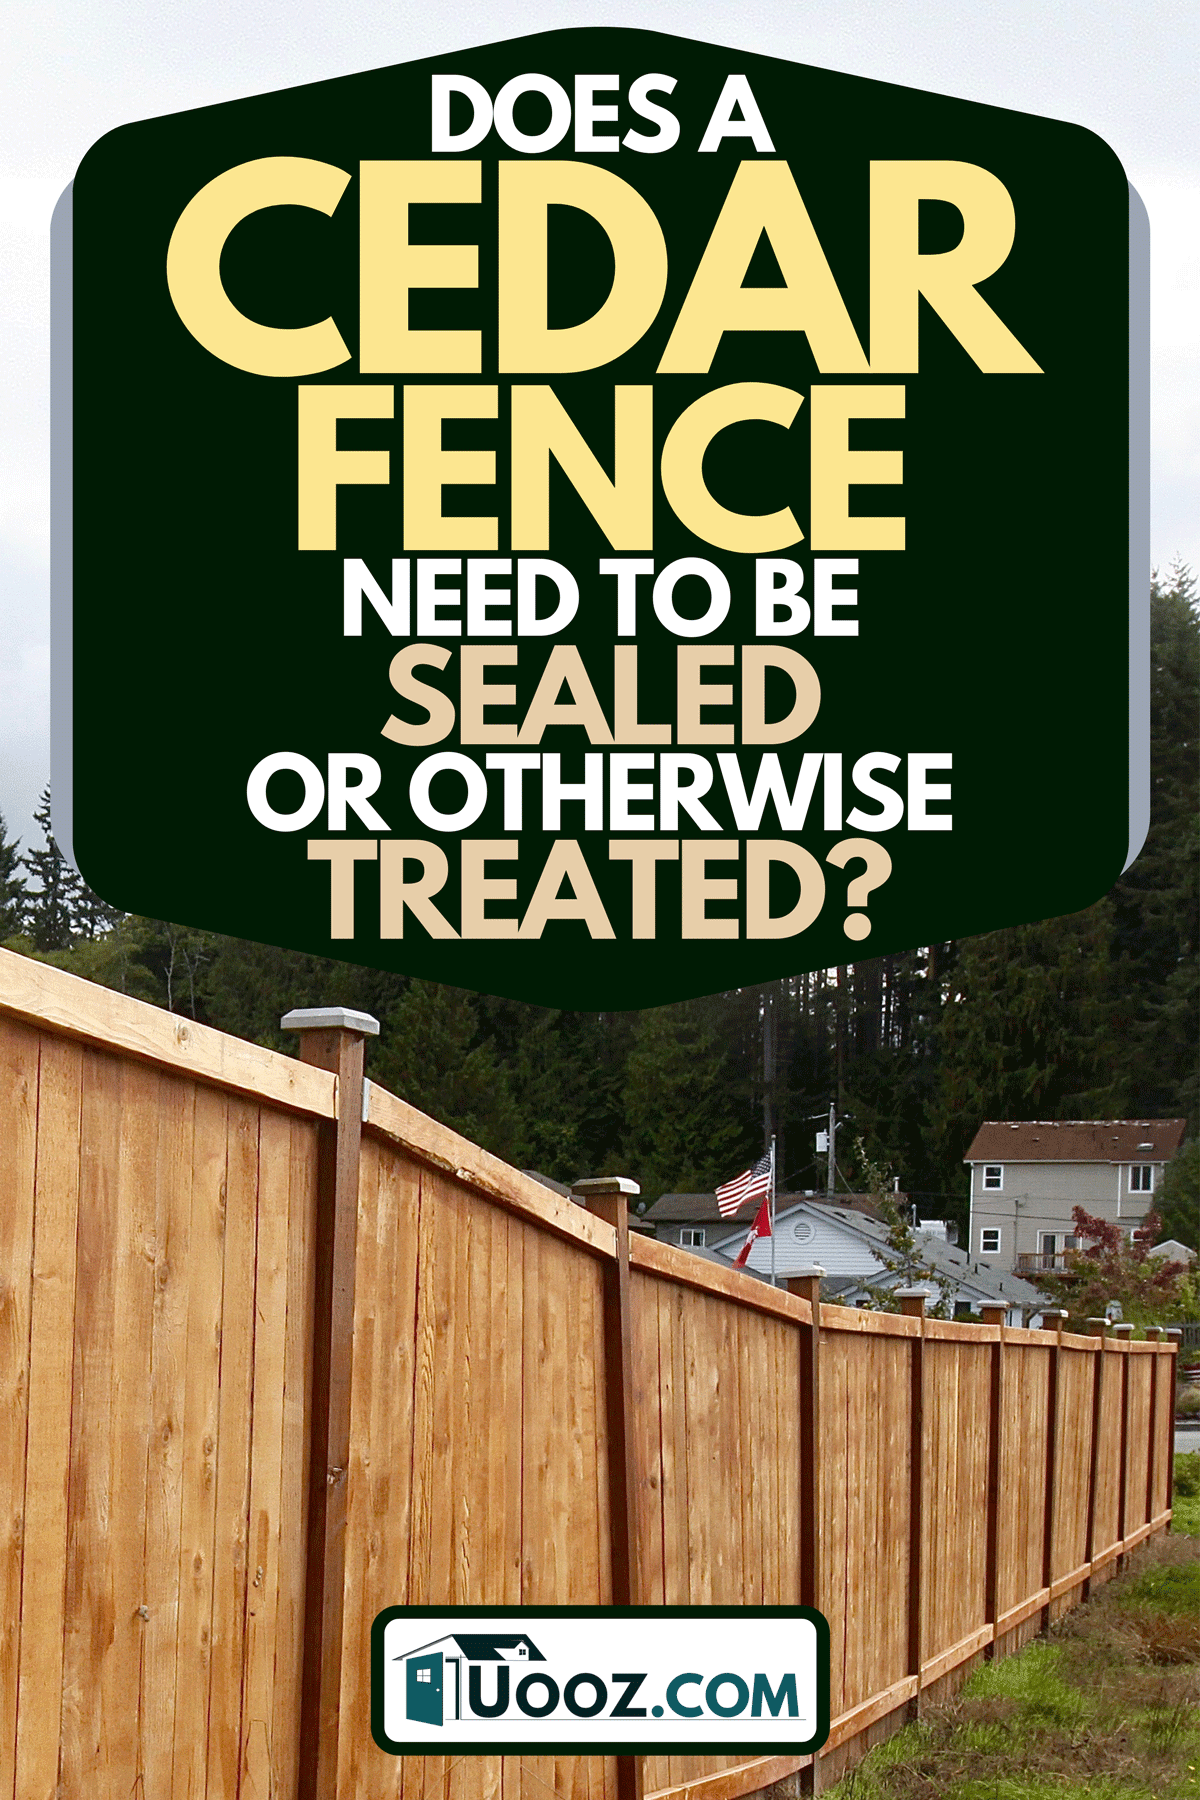 New cedar fence, Does A Cedar Fence Need To Be Sealed Or Otherwise Treated?